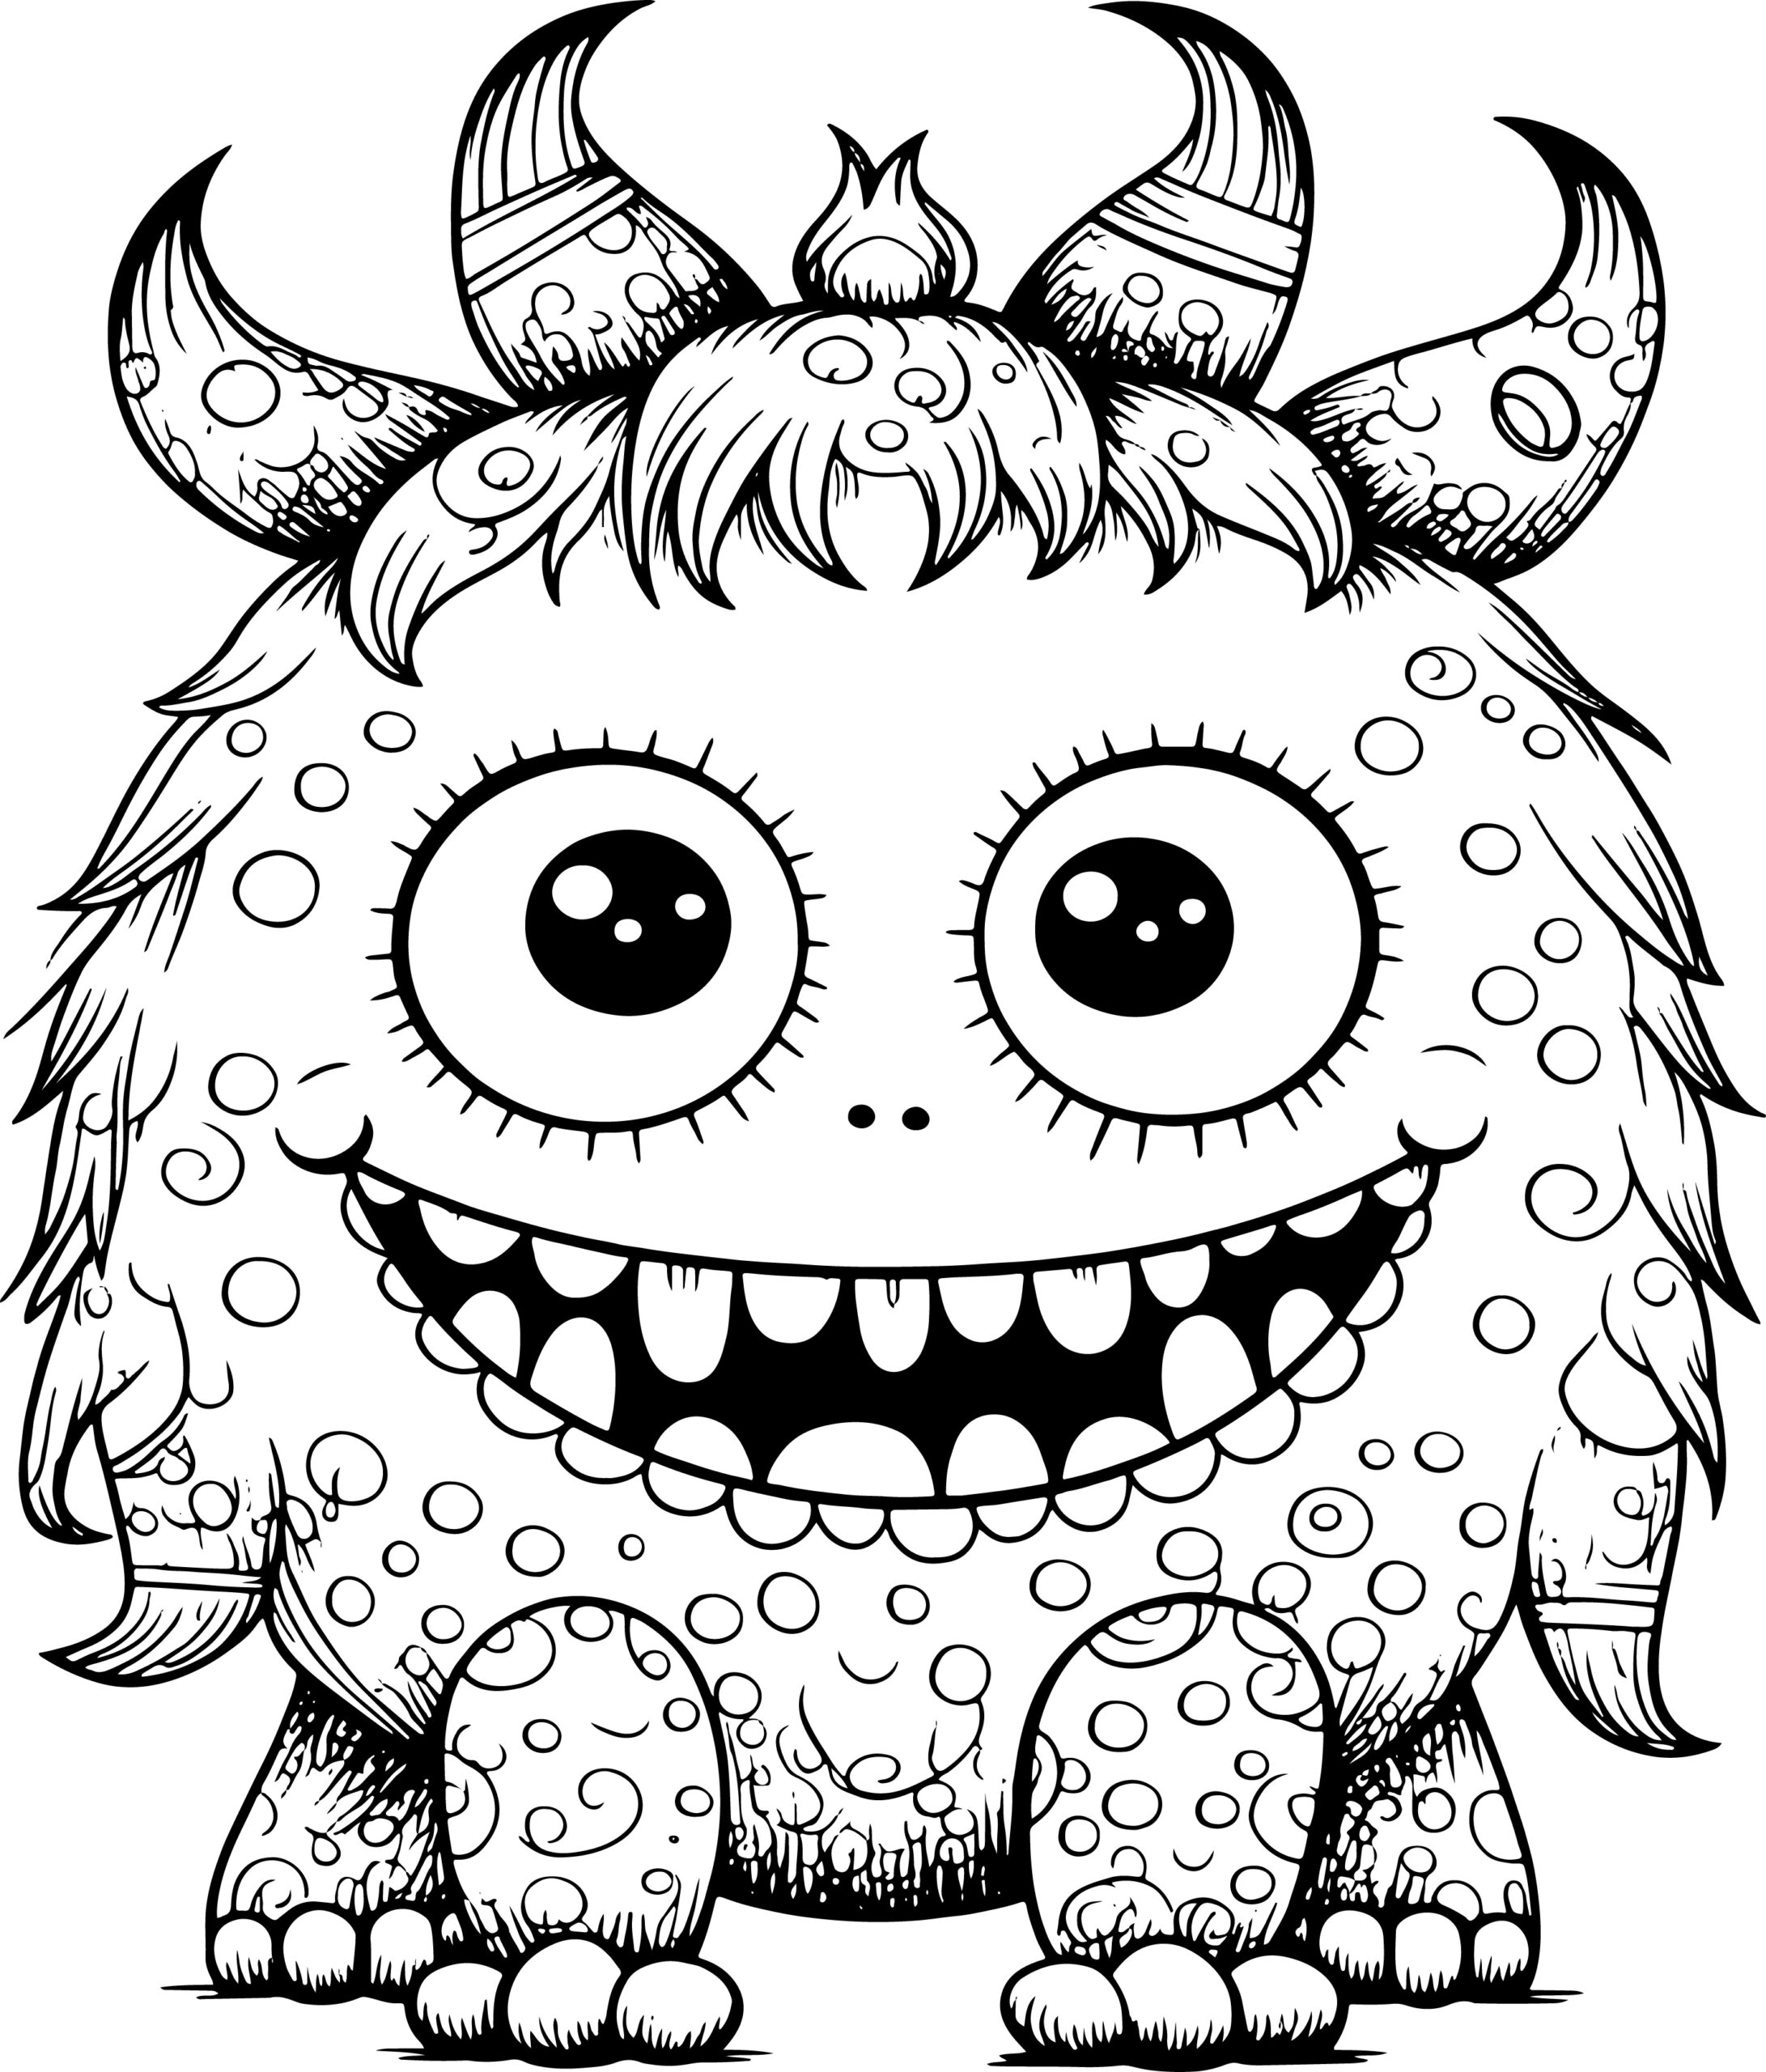 Monster coloring book cute monster coloring pages for kids made by teachers